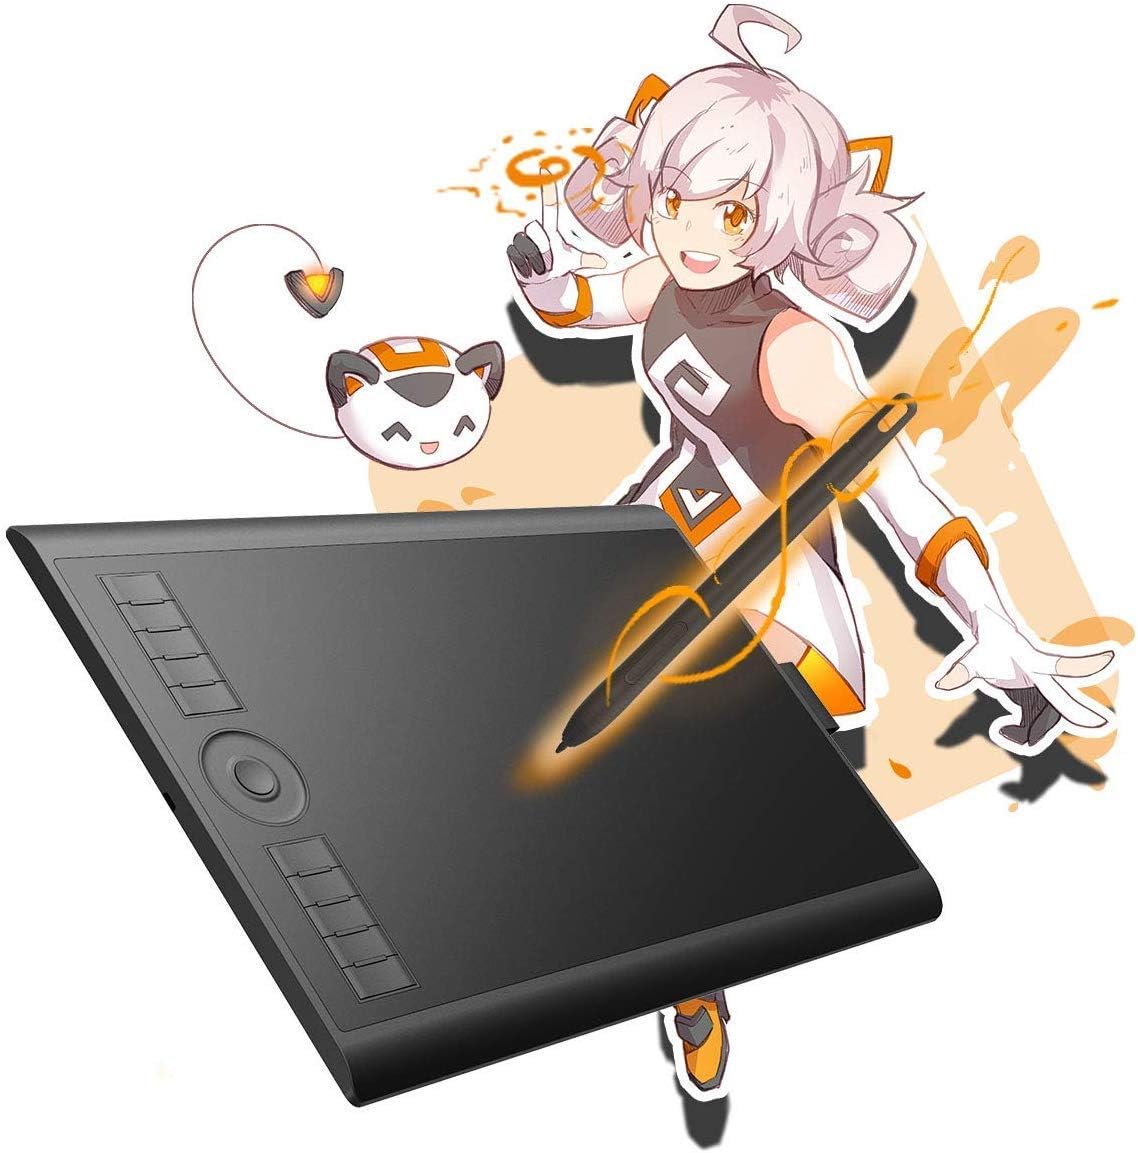 GAOMON M10K 10 x 6.25 Inches Graphic Drawing Tablet [...]